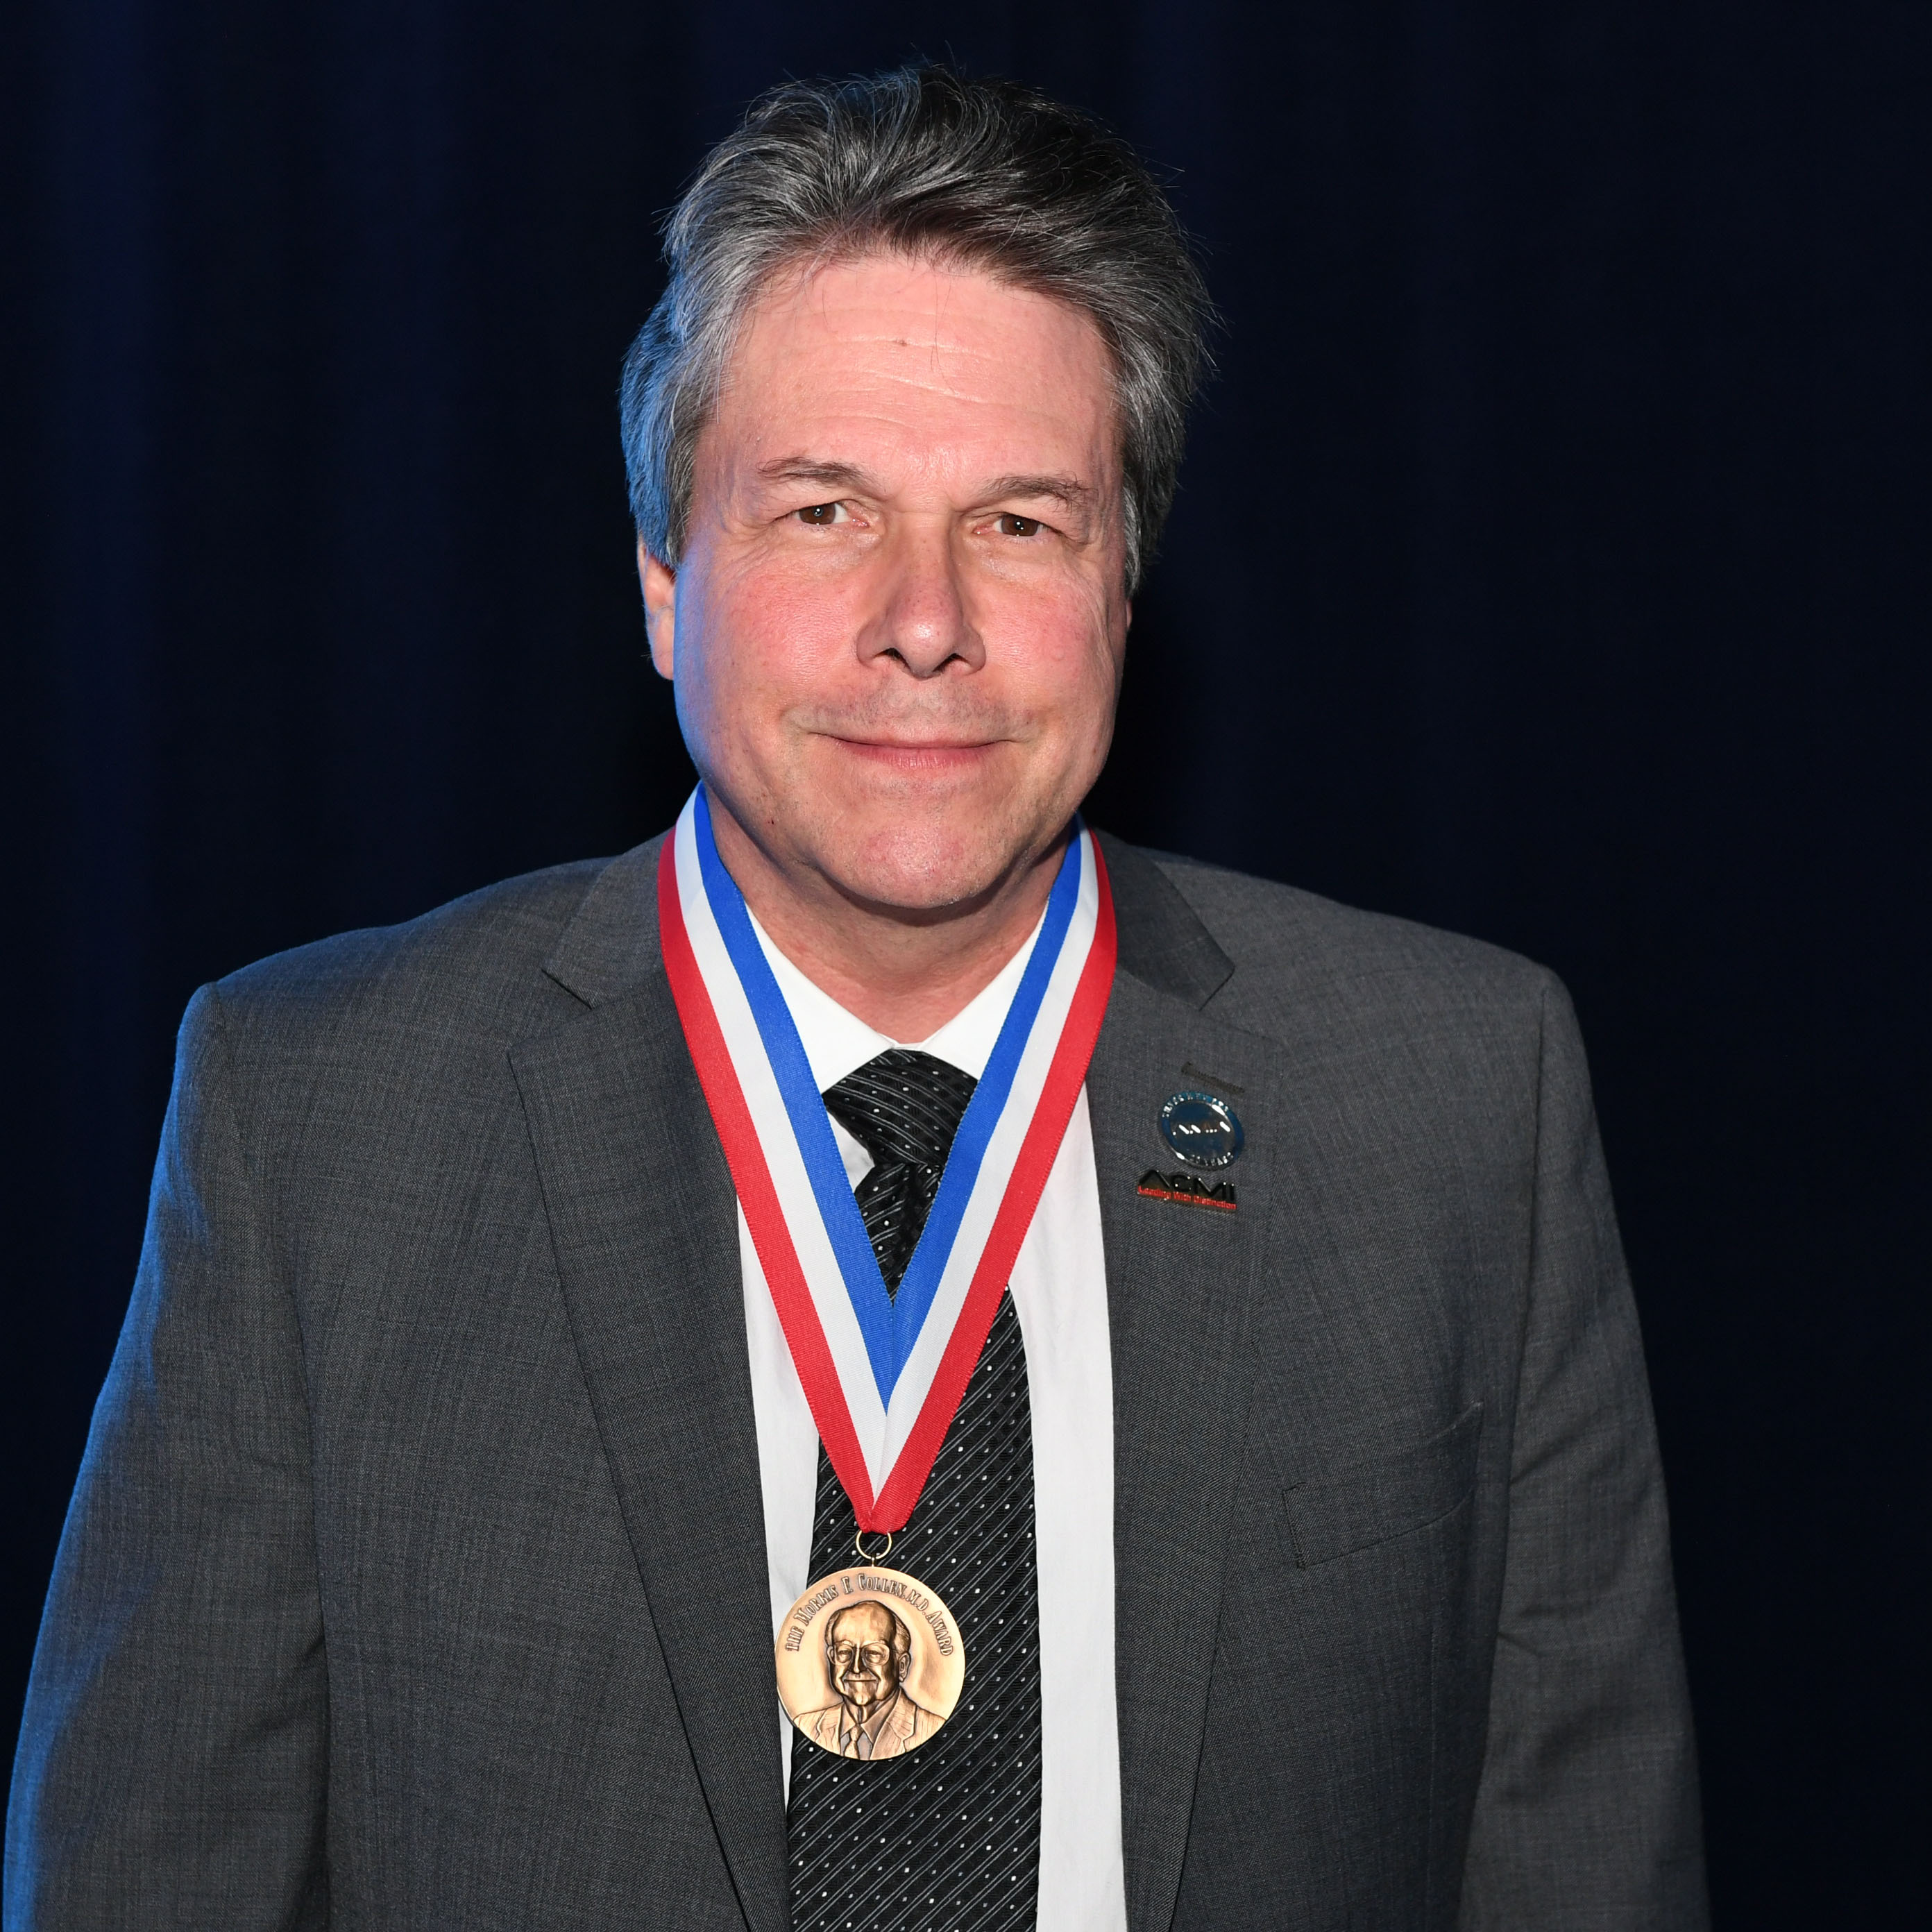 CCTS Co-Director James Cimino Receives 2019 Morris F. Collen Award of Excellence